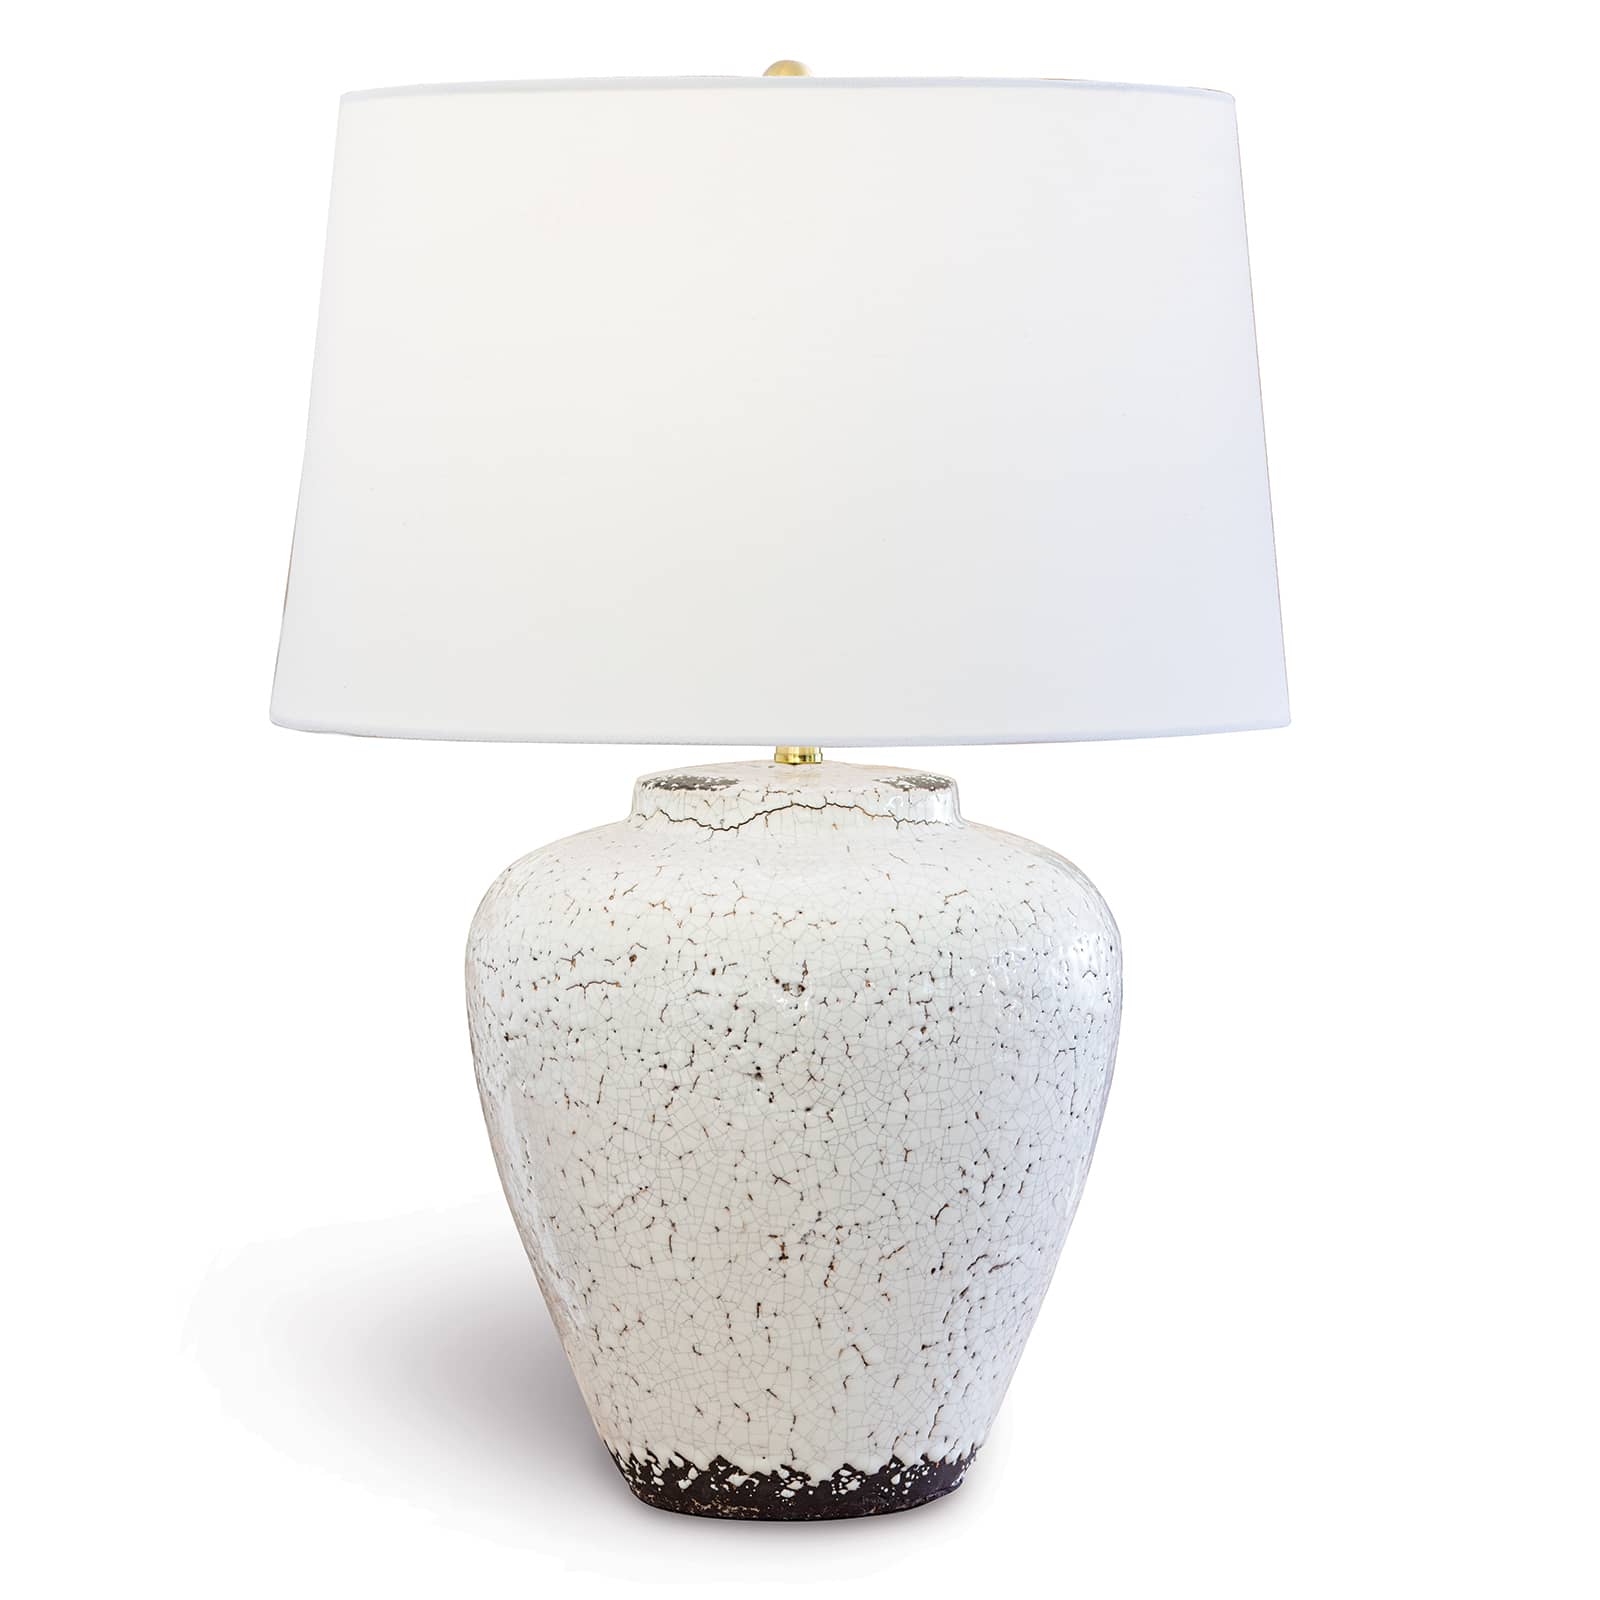 Harper Ceramic Table Lamp in White by Southern Living